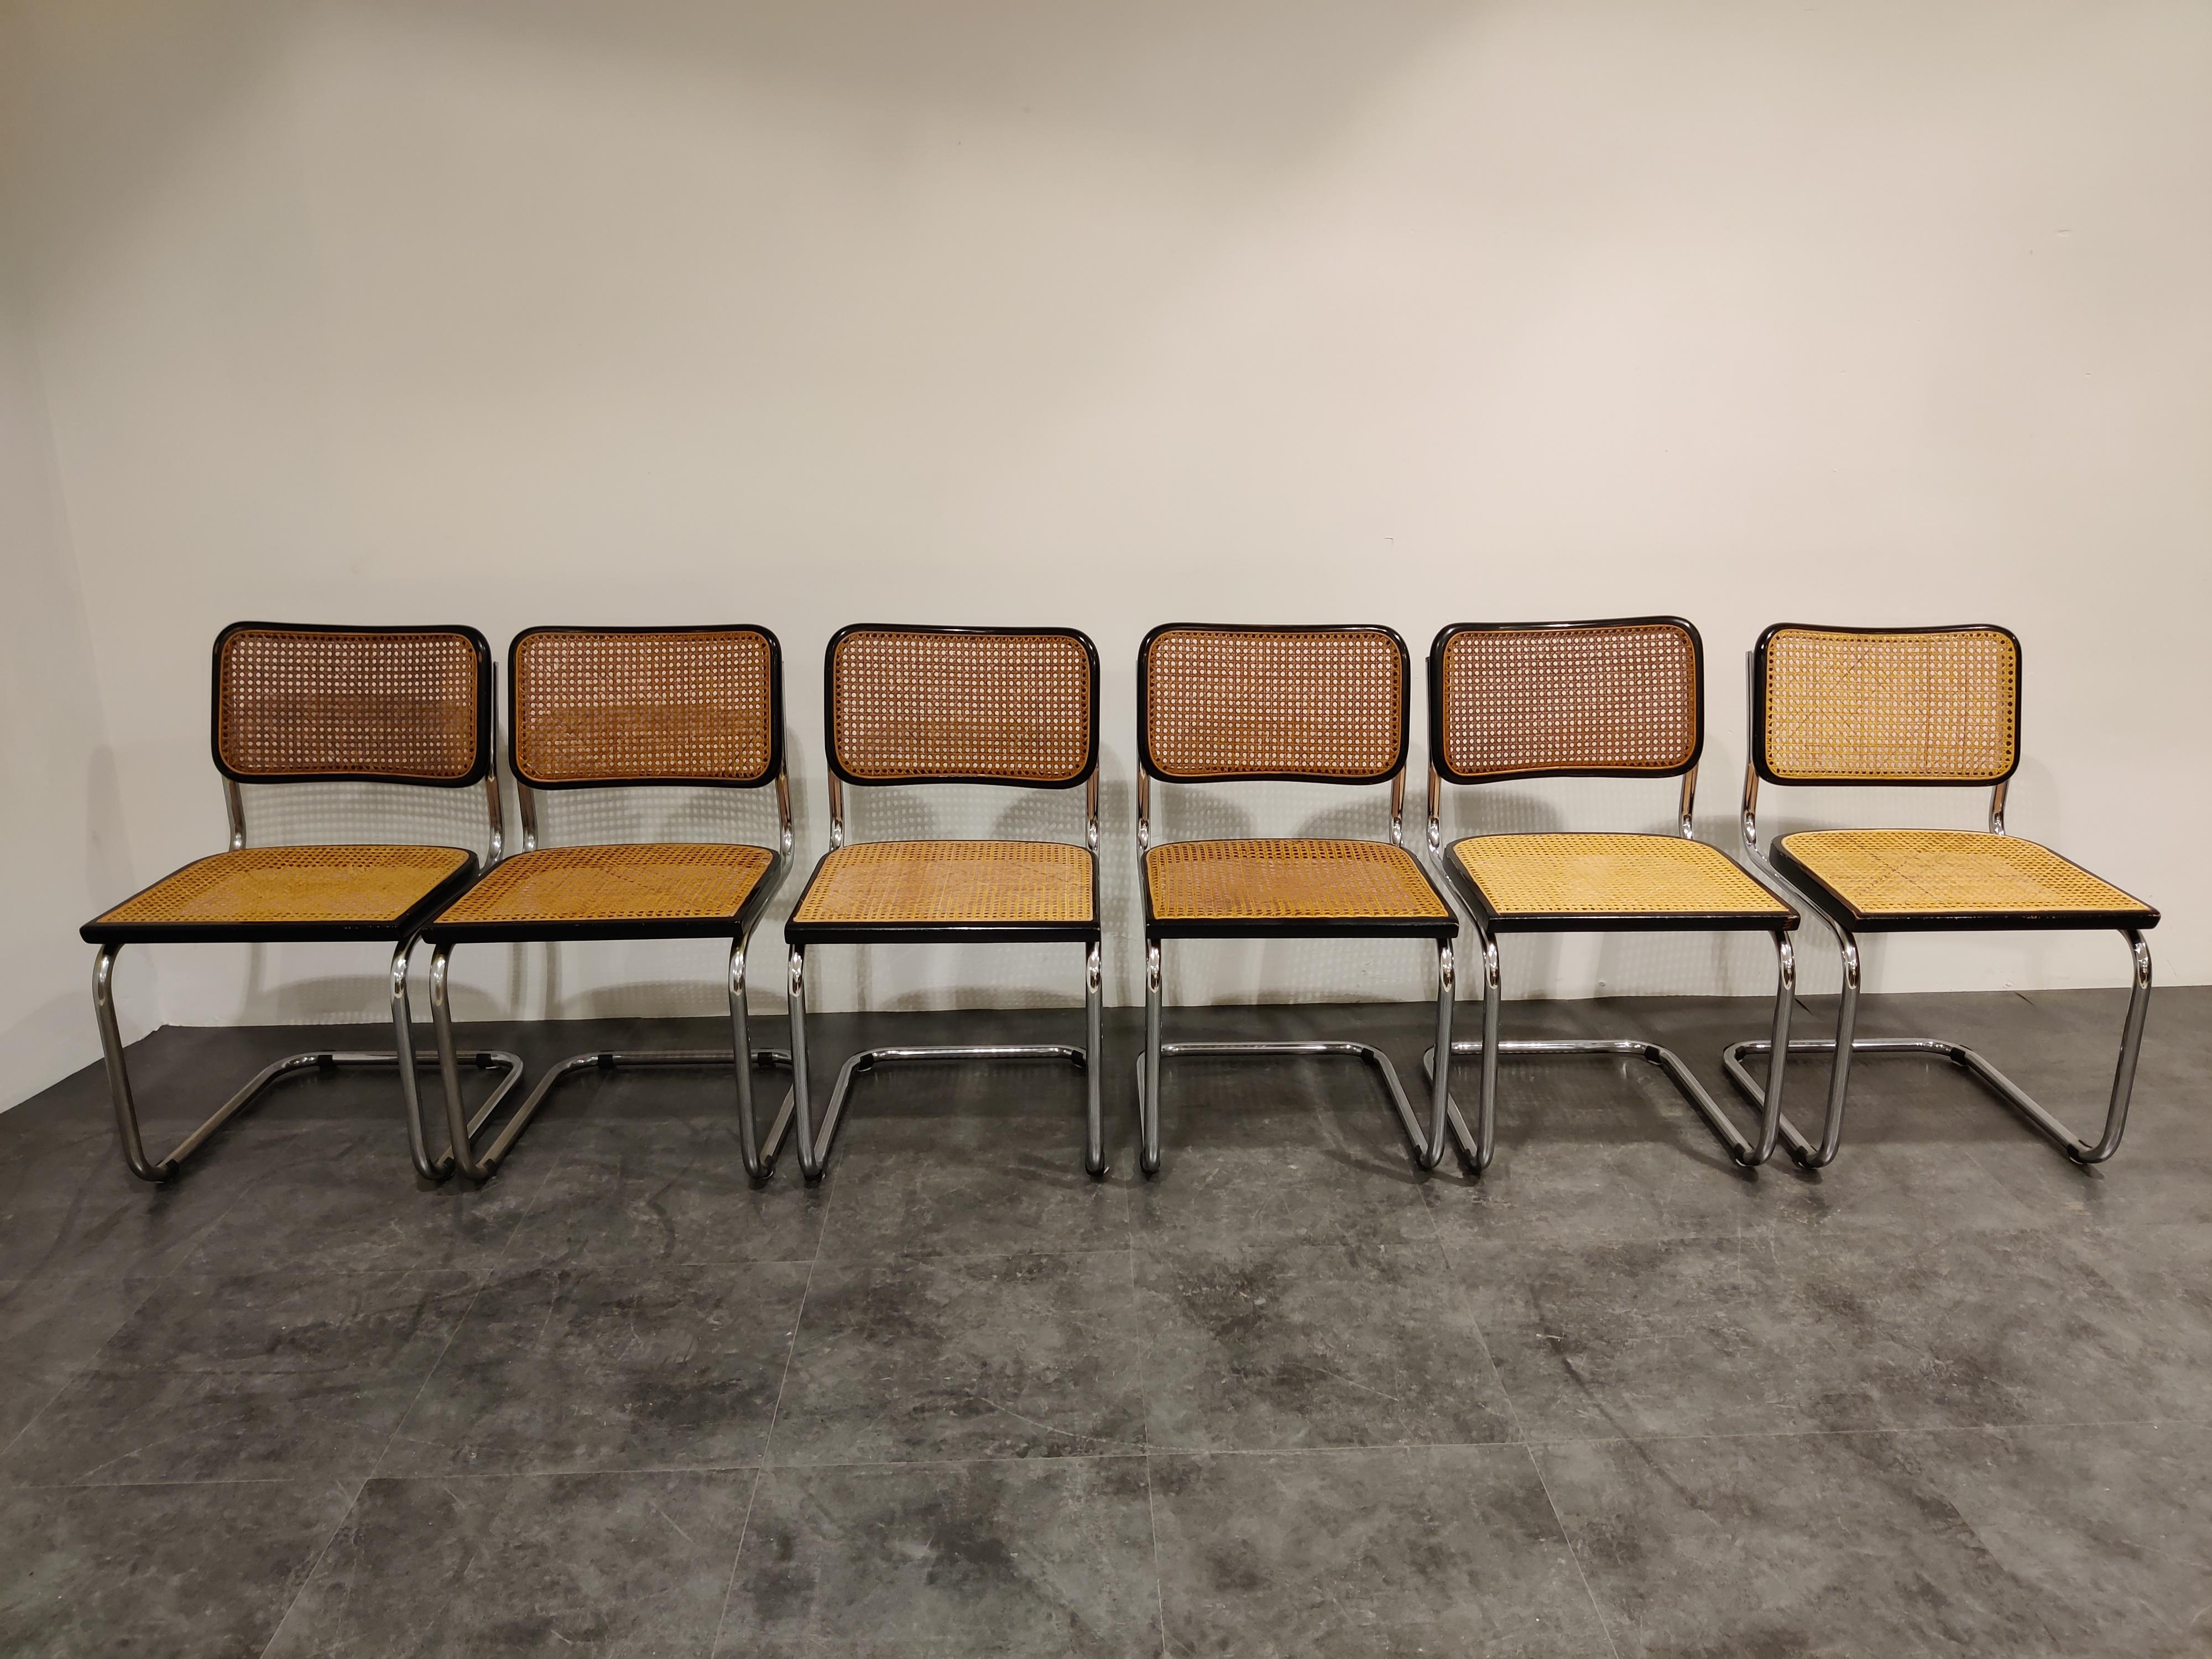 Set of 6 'cesca'  bauhaus design chairs. Original design dates from 1926.

Tubular chrome frame, cane seats and black lacquered wood.

Good condition.

Purchased by first owner in 1978.

Dimensions:
Height: 82cm/32.28